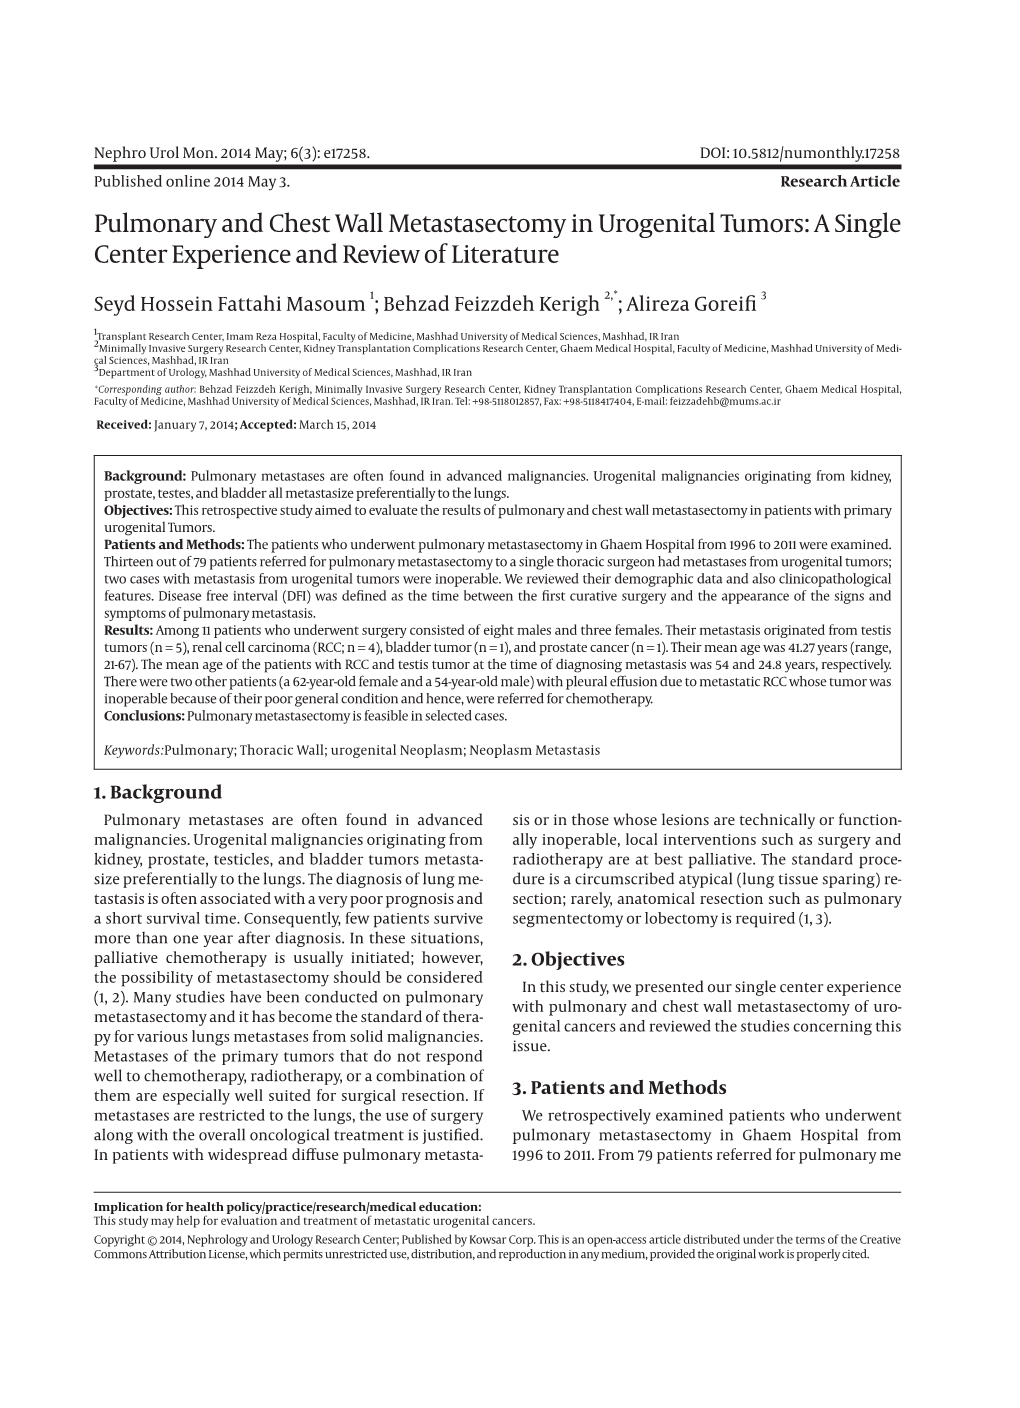 Pulmonary and Chest Wall Metastasectomy in Urogenital Tumors: a Single Center Experience and Review of Literature